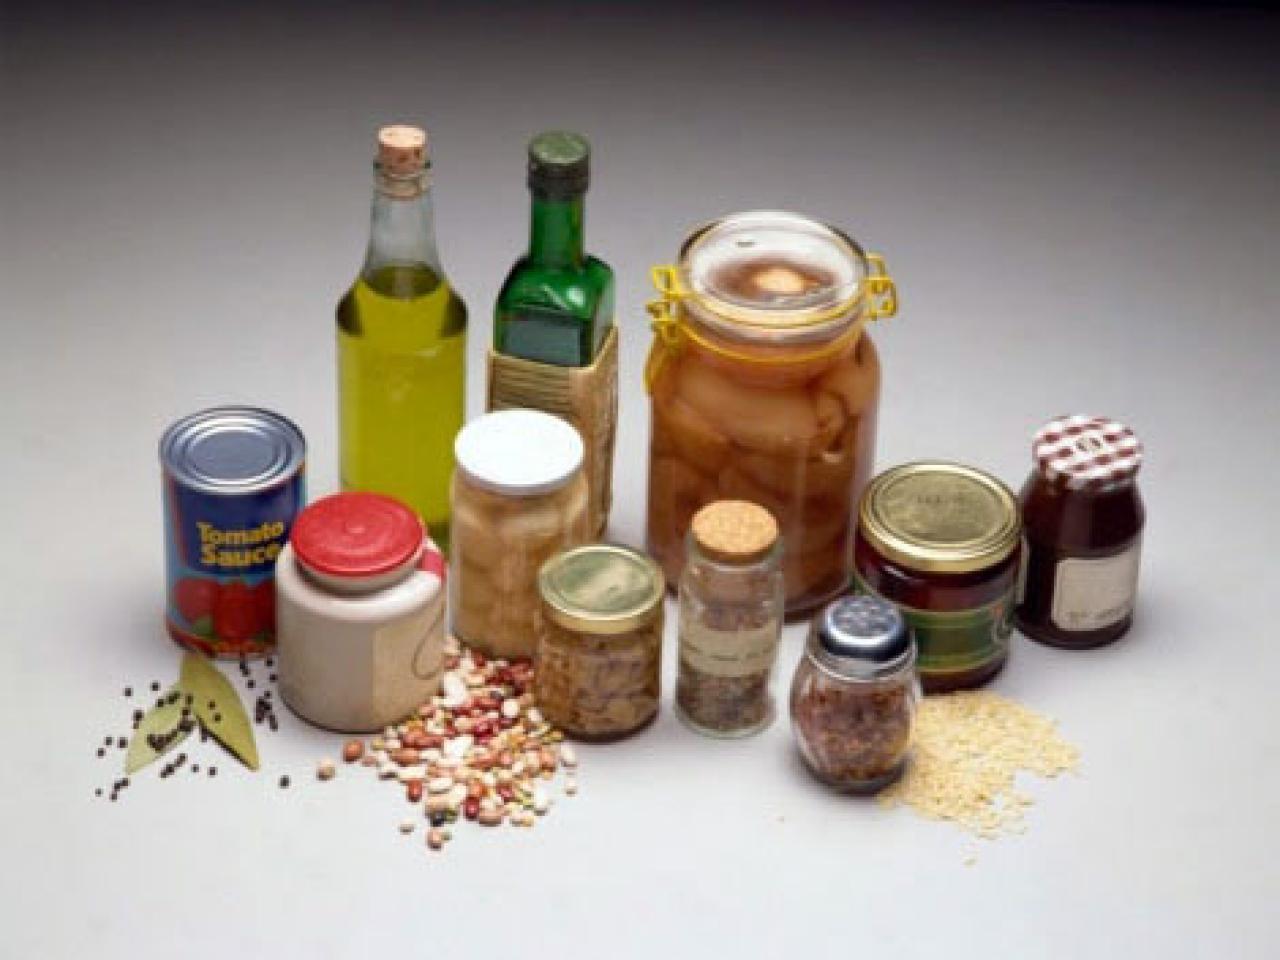 List of Pantry Essentials to Make Many Delicious Meals